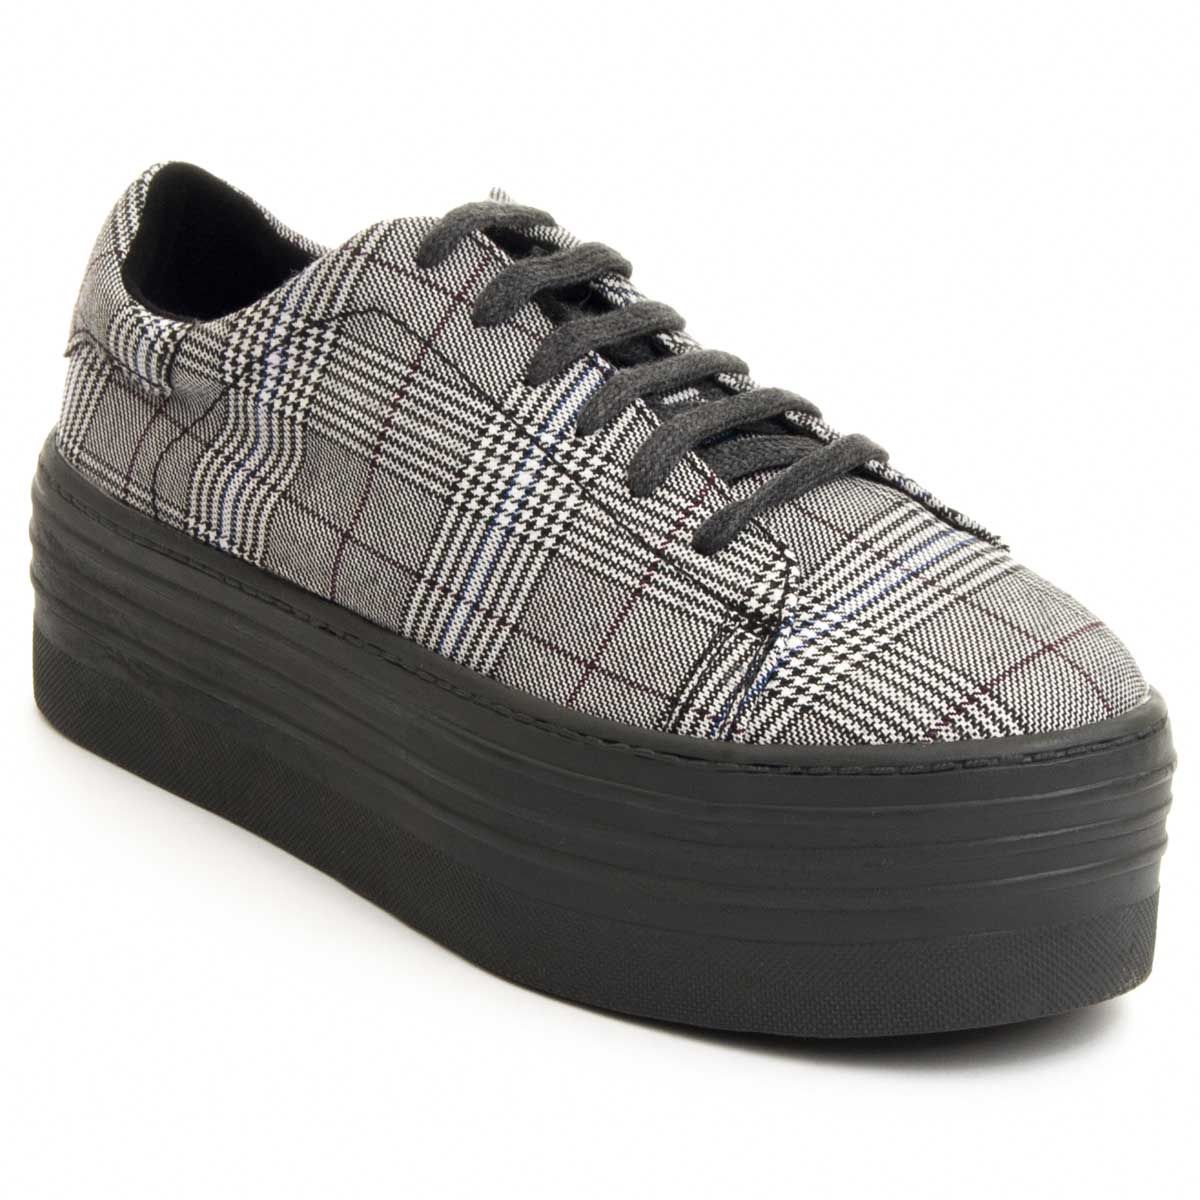 Spectacular trend platform sneaker. Ideal to give a special touch to your looks. Anti-slip rubber floor. Padded plant. Capsule BY Corina collection.